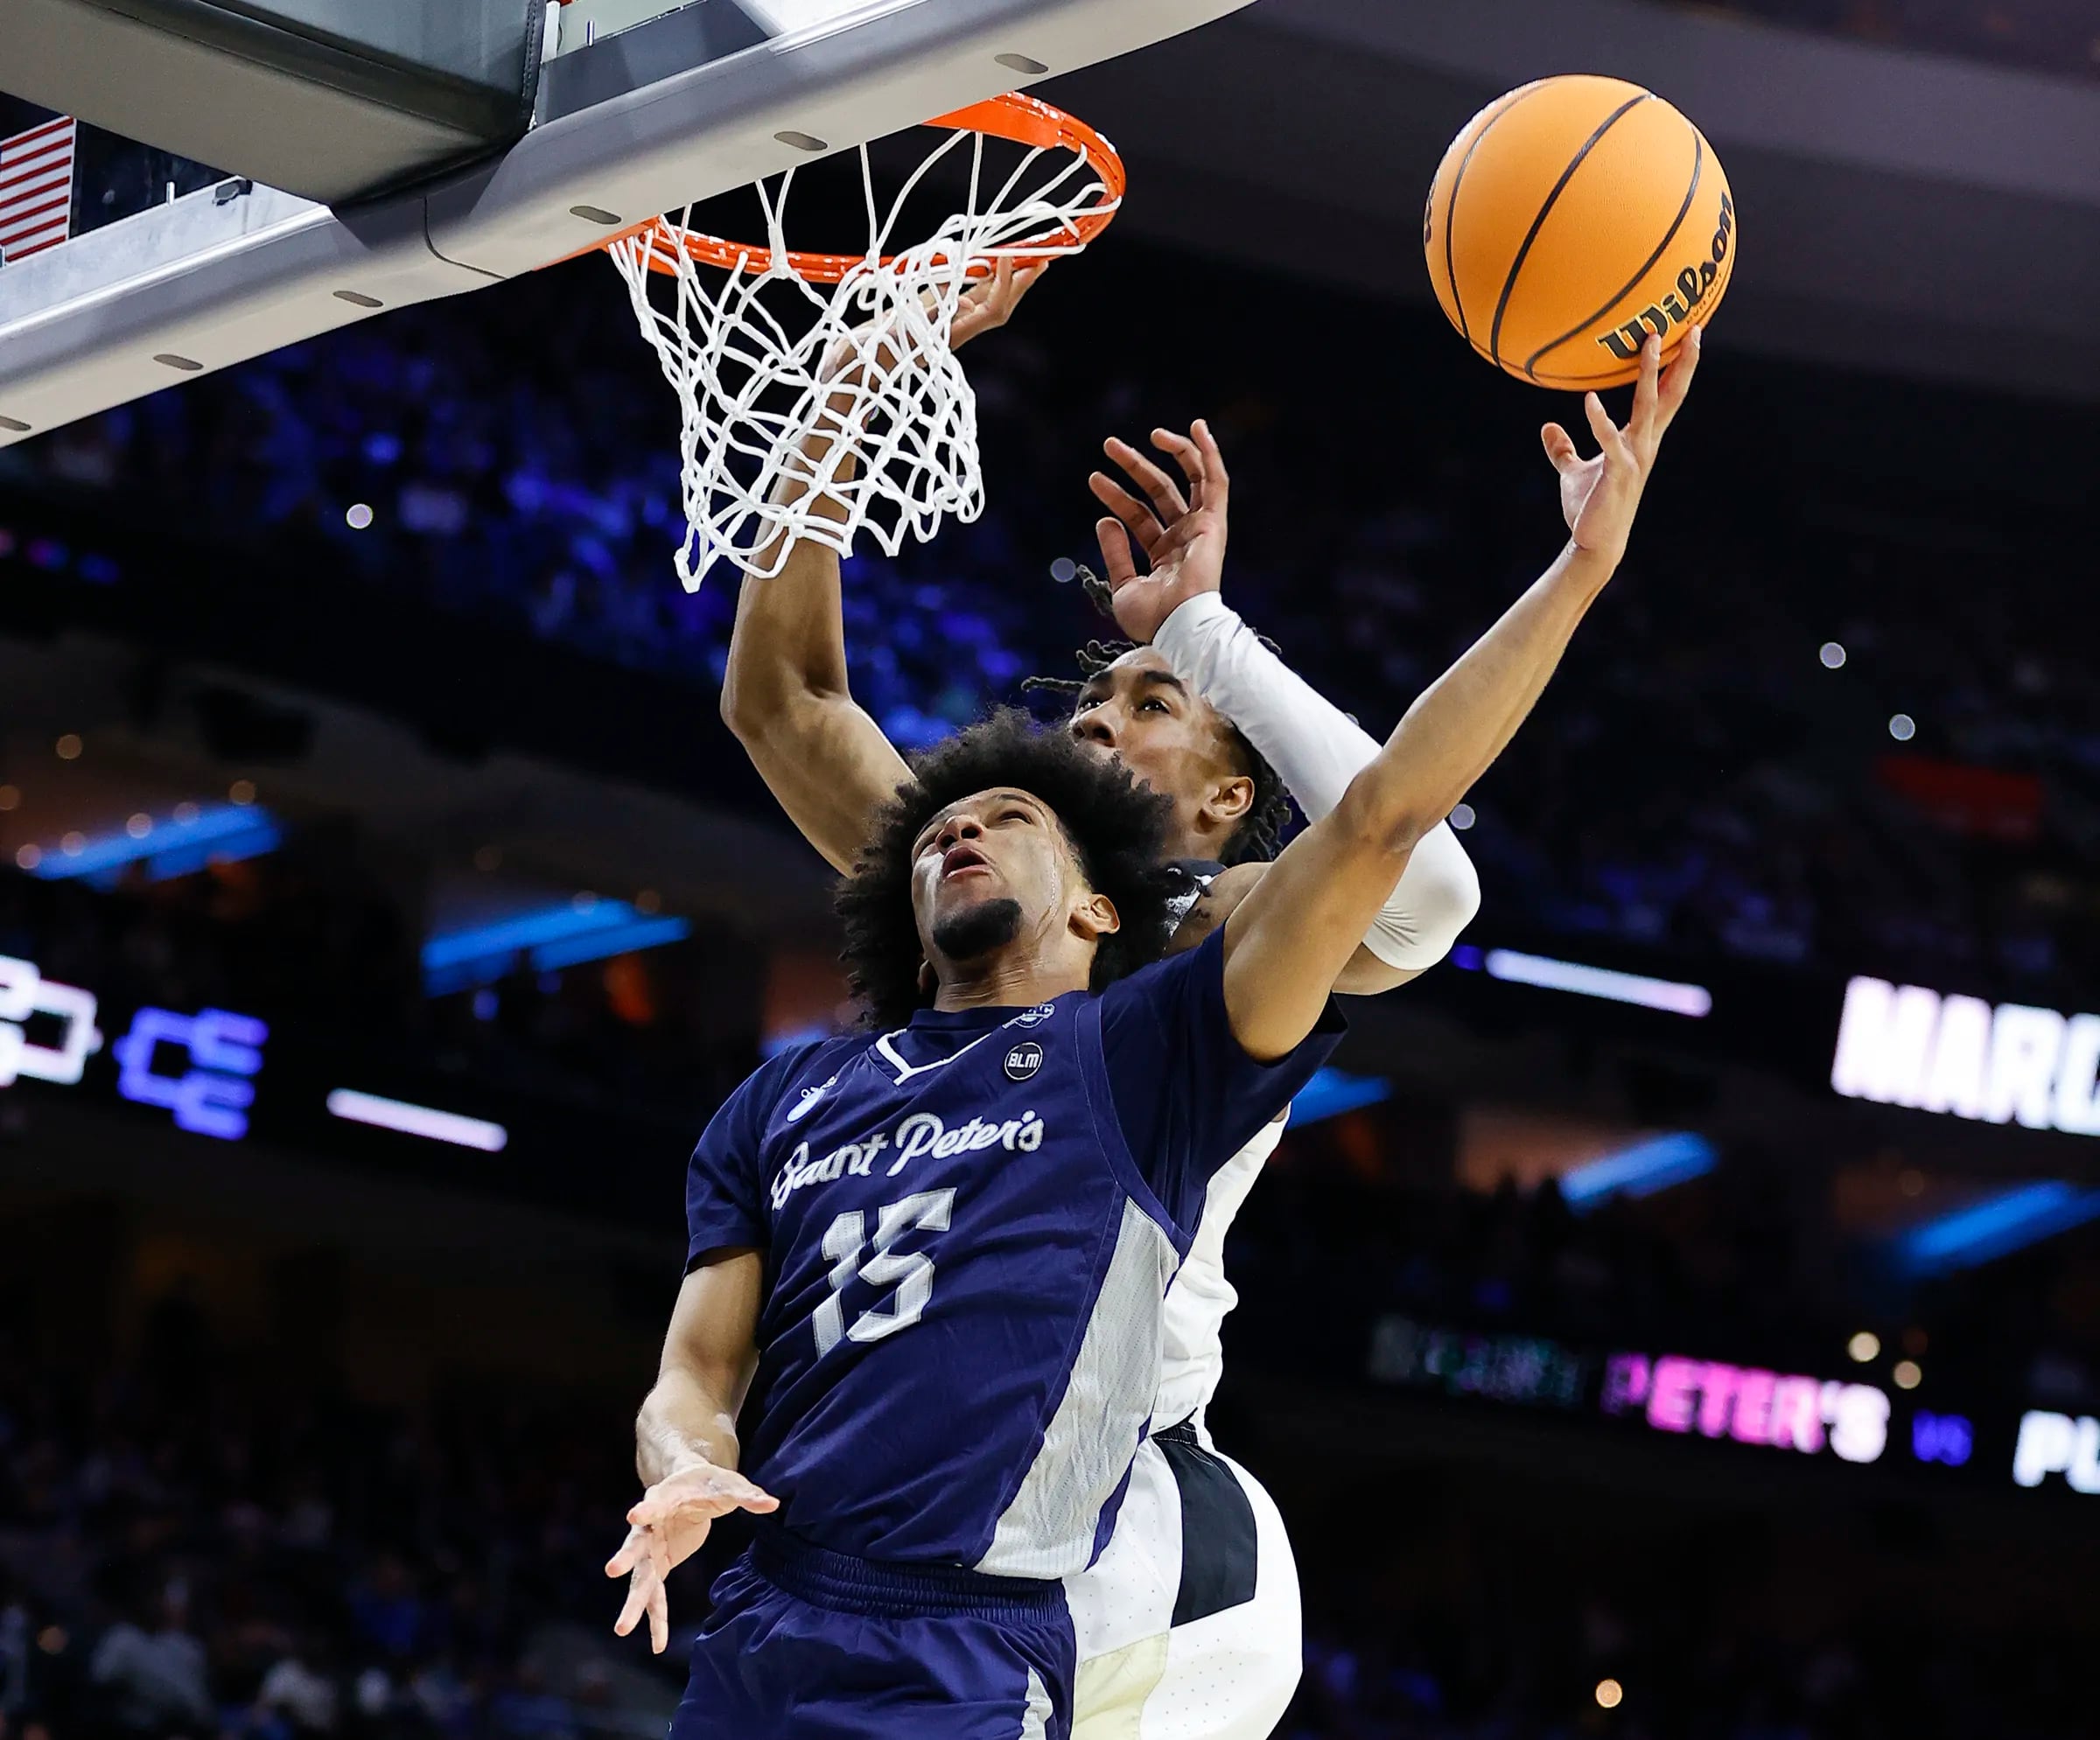 Photos of Saint Peter's advancing to the Elite Eight